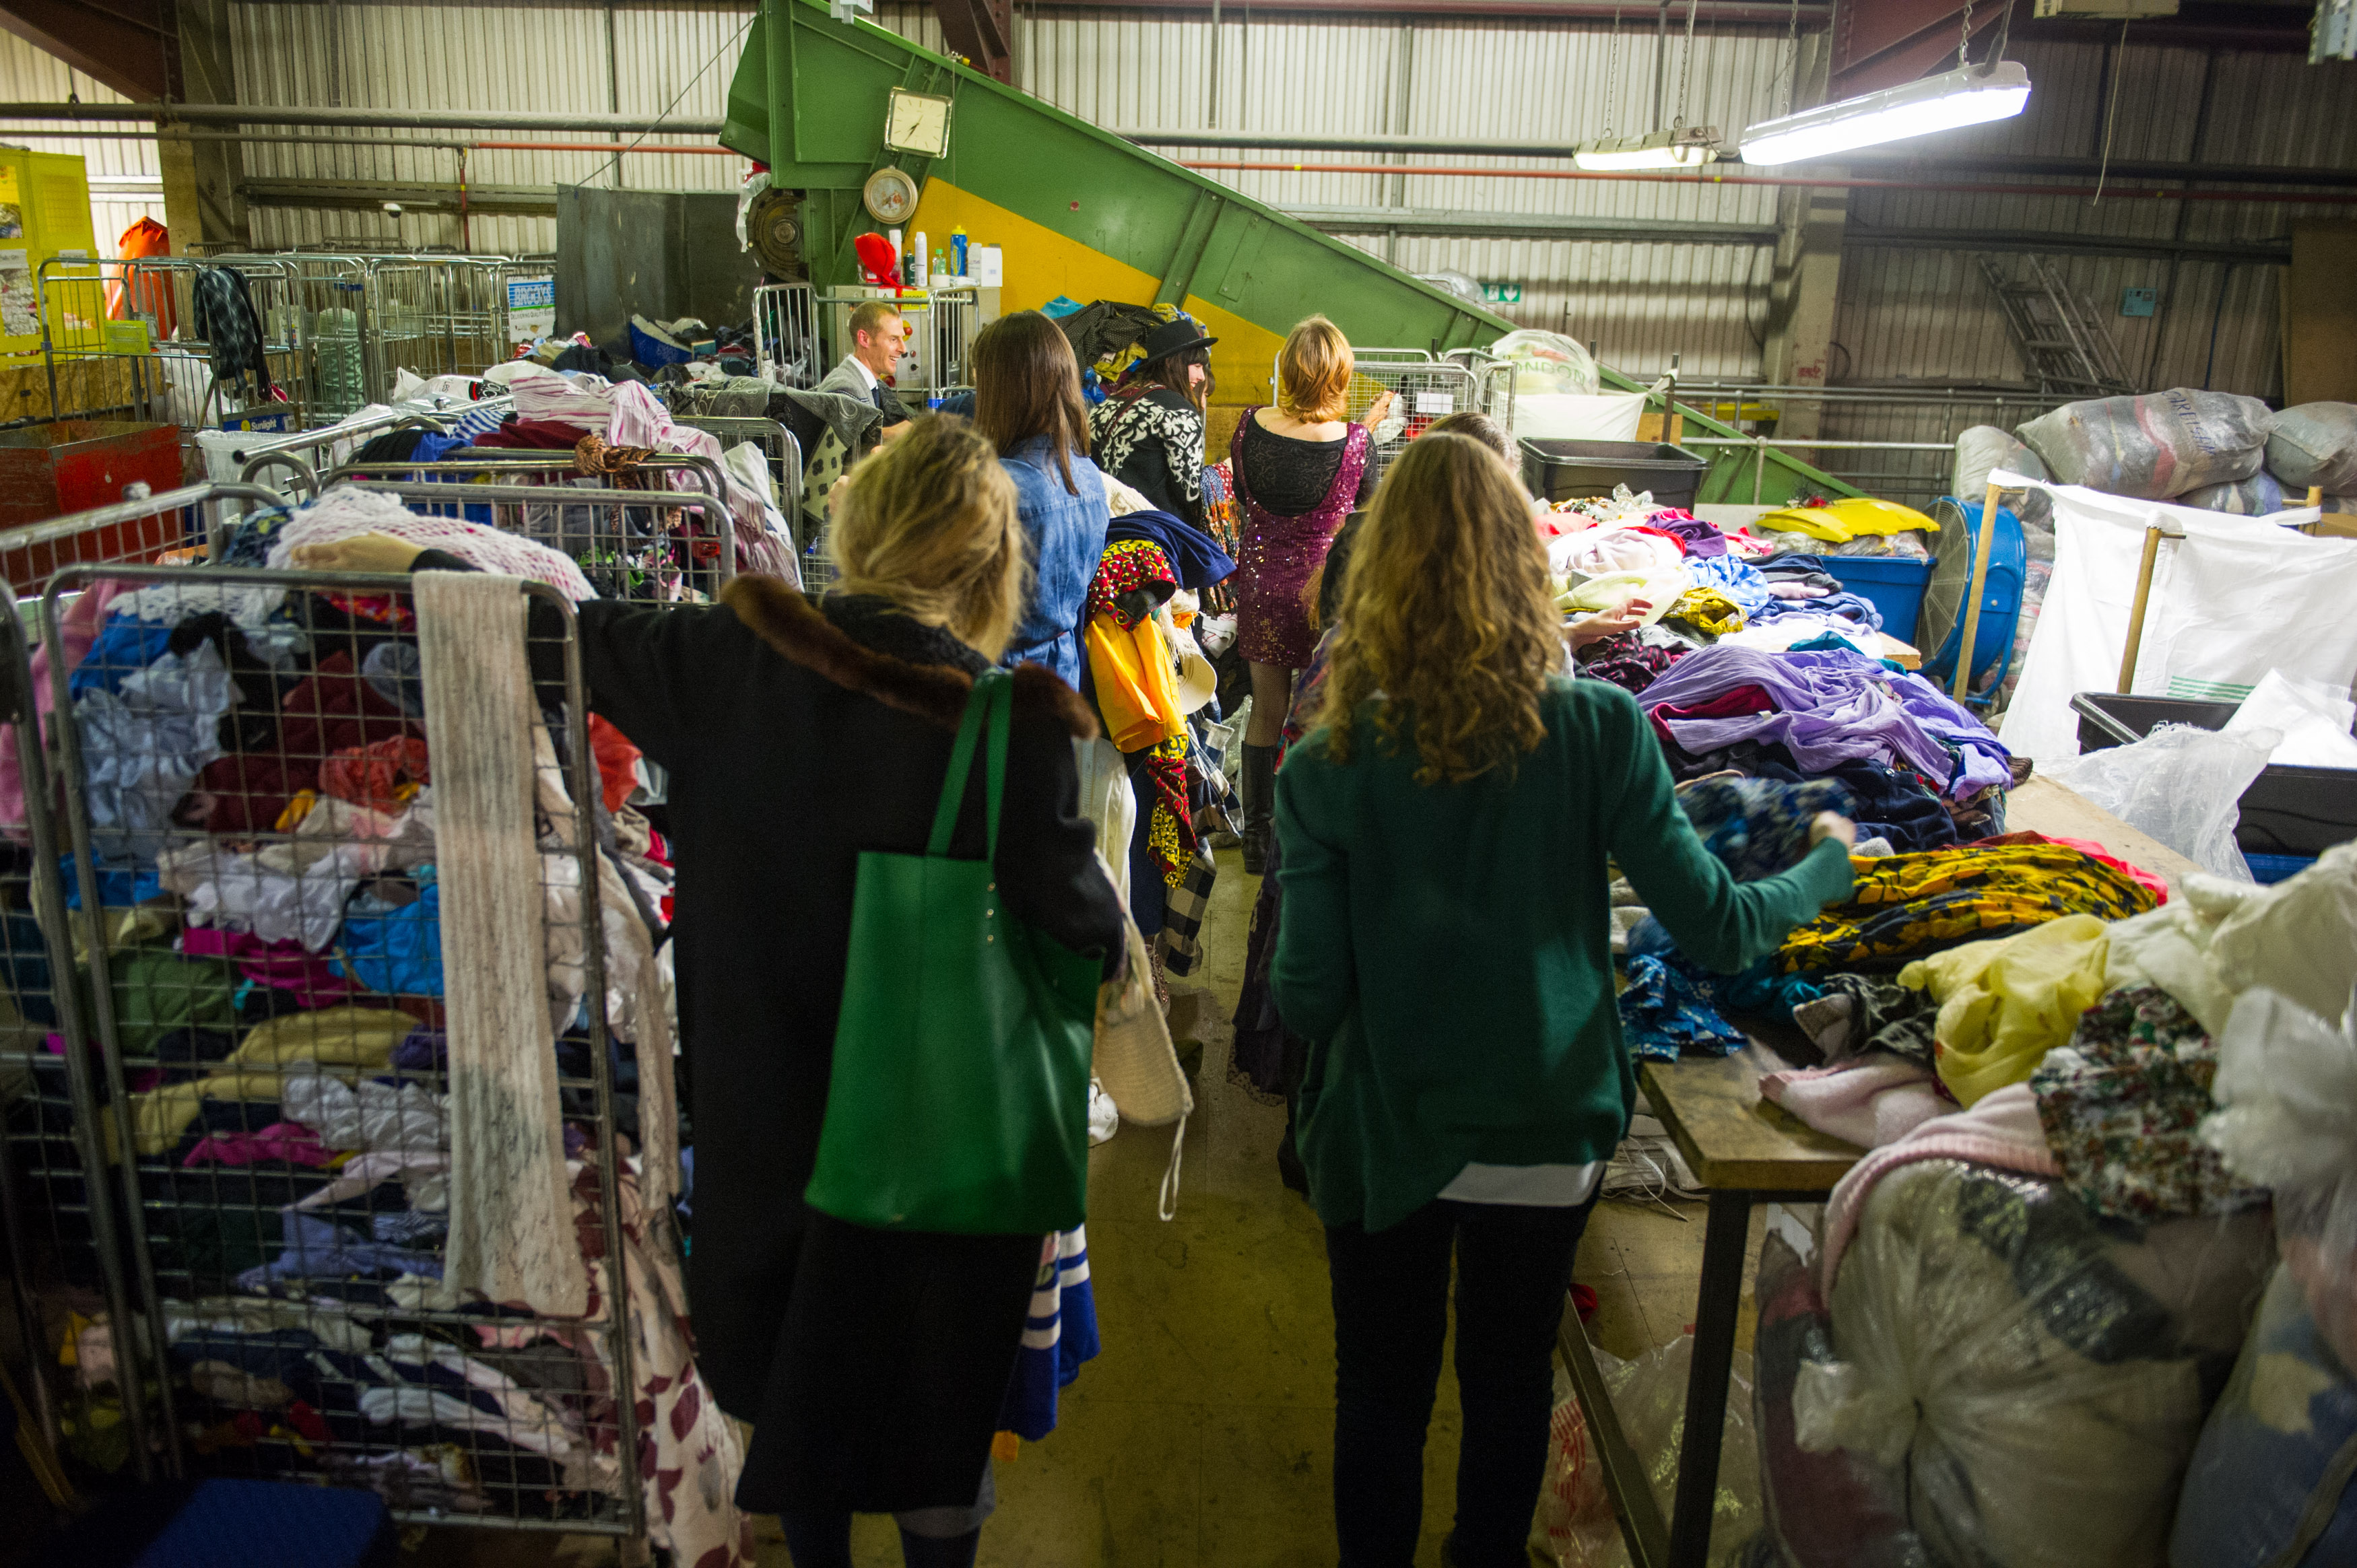 Fashion Salvage event  by loveyourclothes.org.uk LMB textile recycling warehouse, Canning Town, London